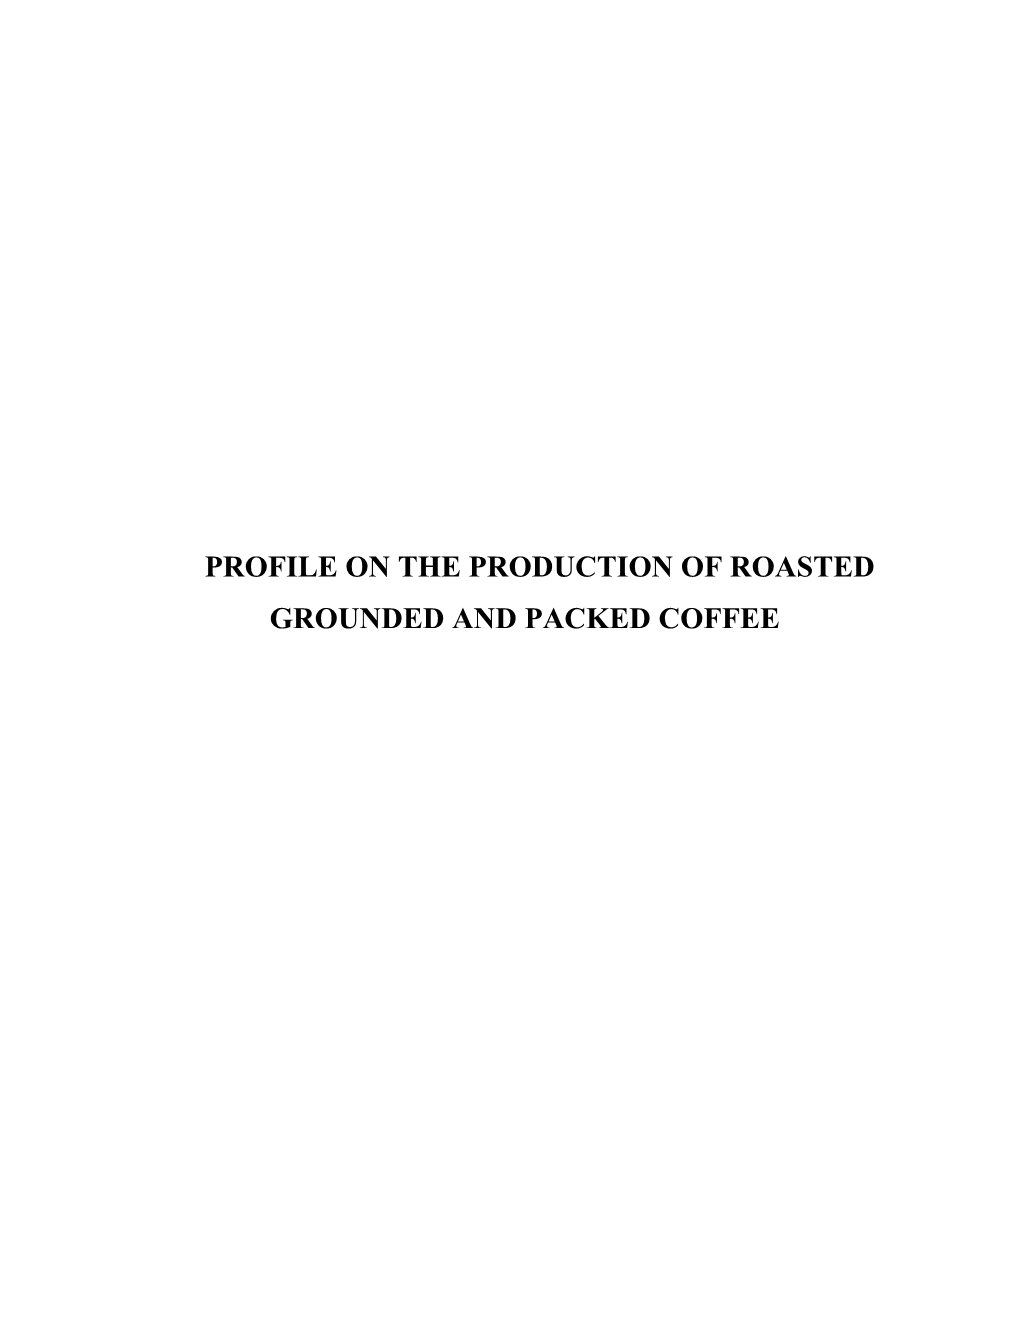 Profile on the Production of Roasted Grounded and Packed Coffee